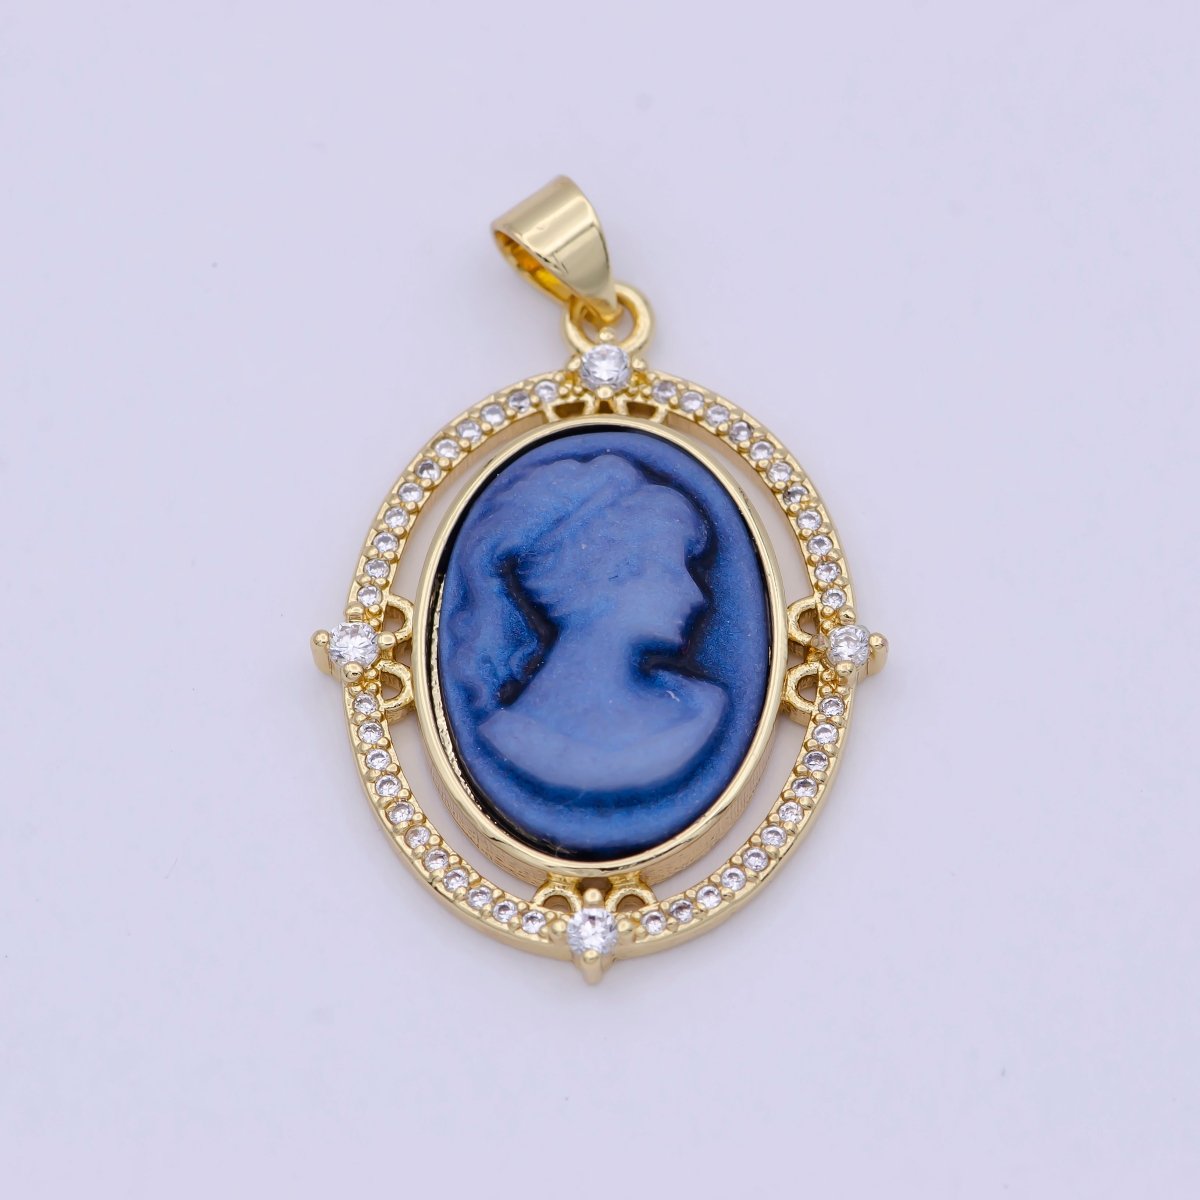 24K Gold Filled Micro Paved CZ Blue Pink Green Agate Women's Portrait Italian Cameo Victorian Vintage Pendant N-616 N-617 N-618 - DLUXCA